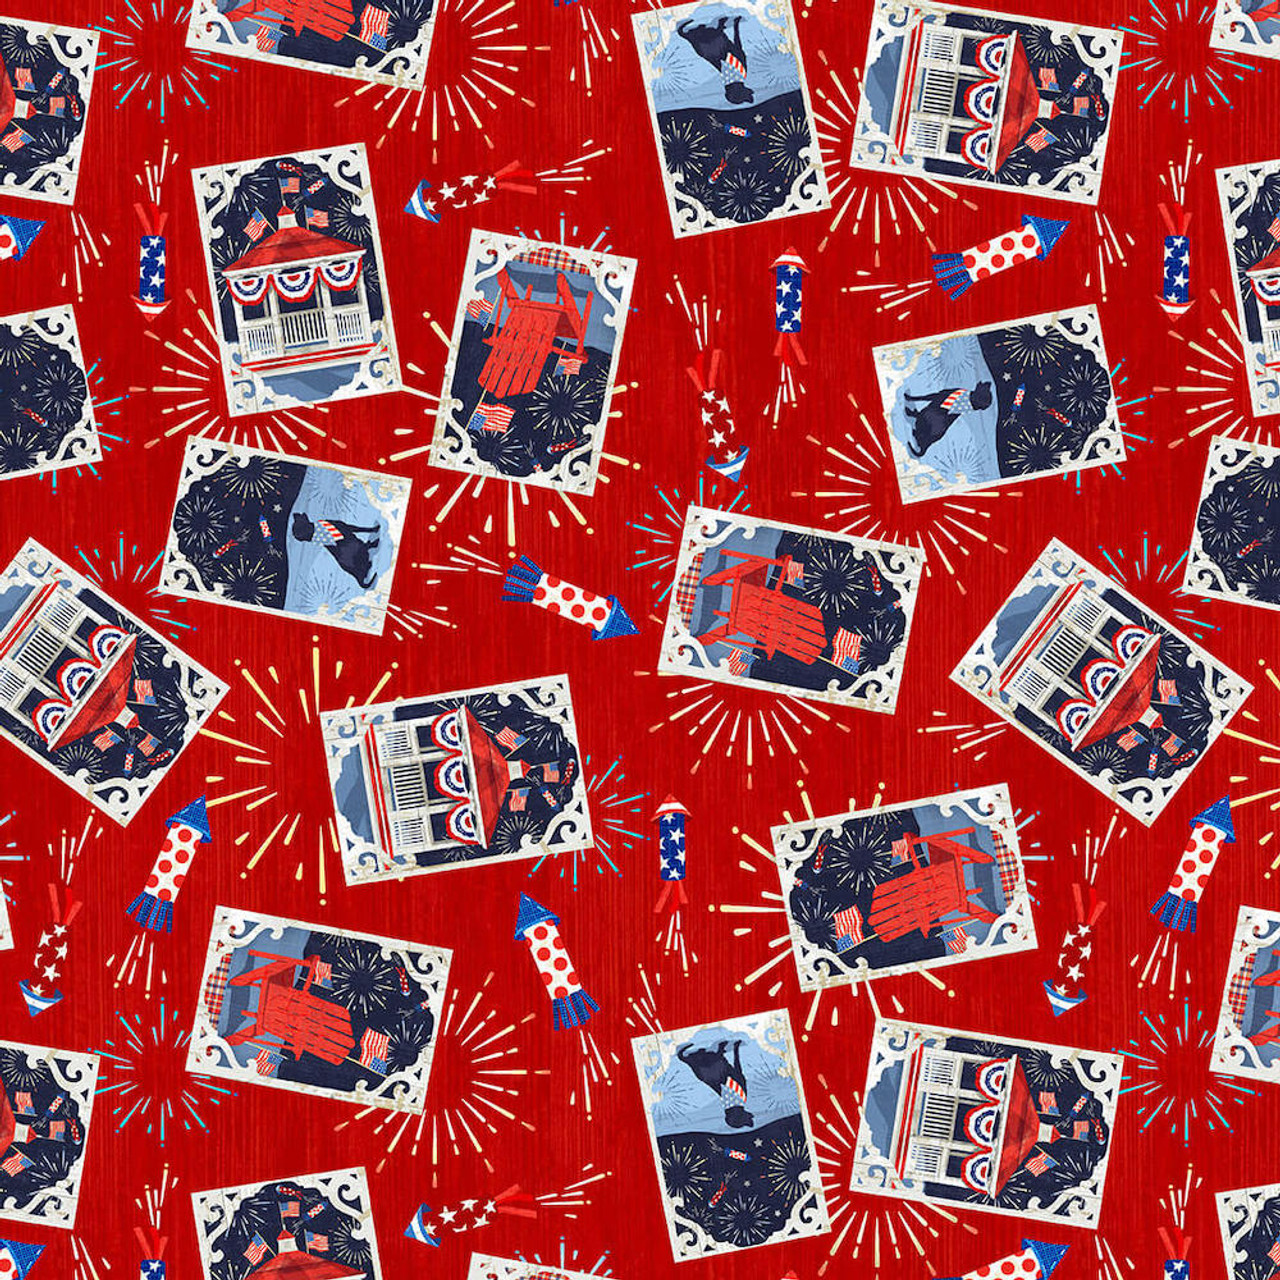 Henry Glass Patriotic Picnic Tossed Images In Boxes Red Cotton Fabric By The Yard